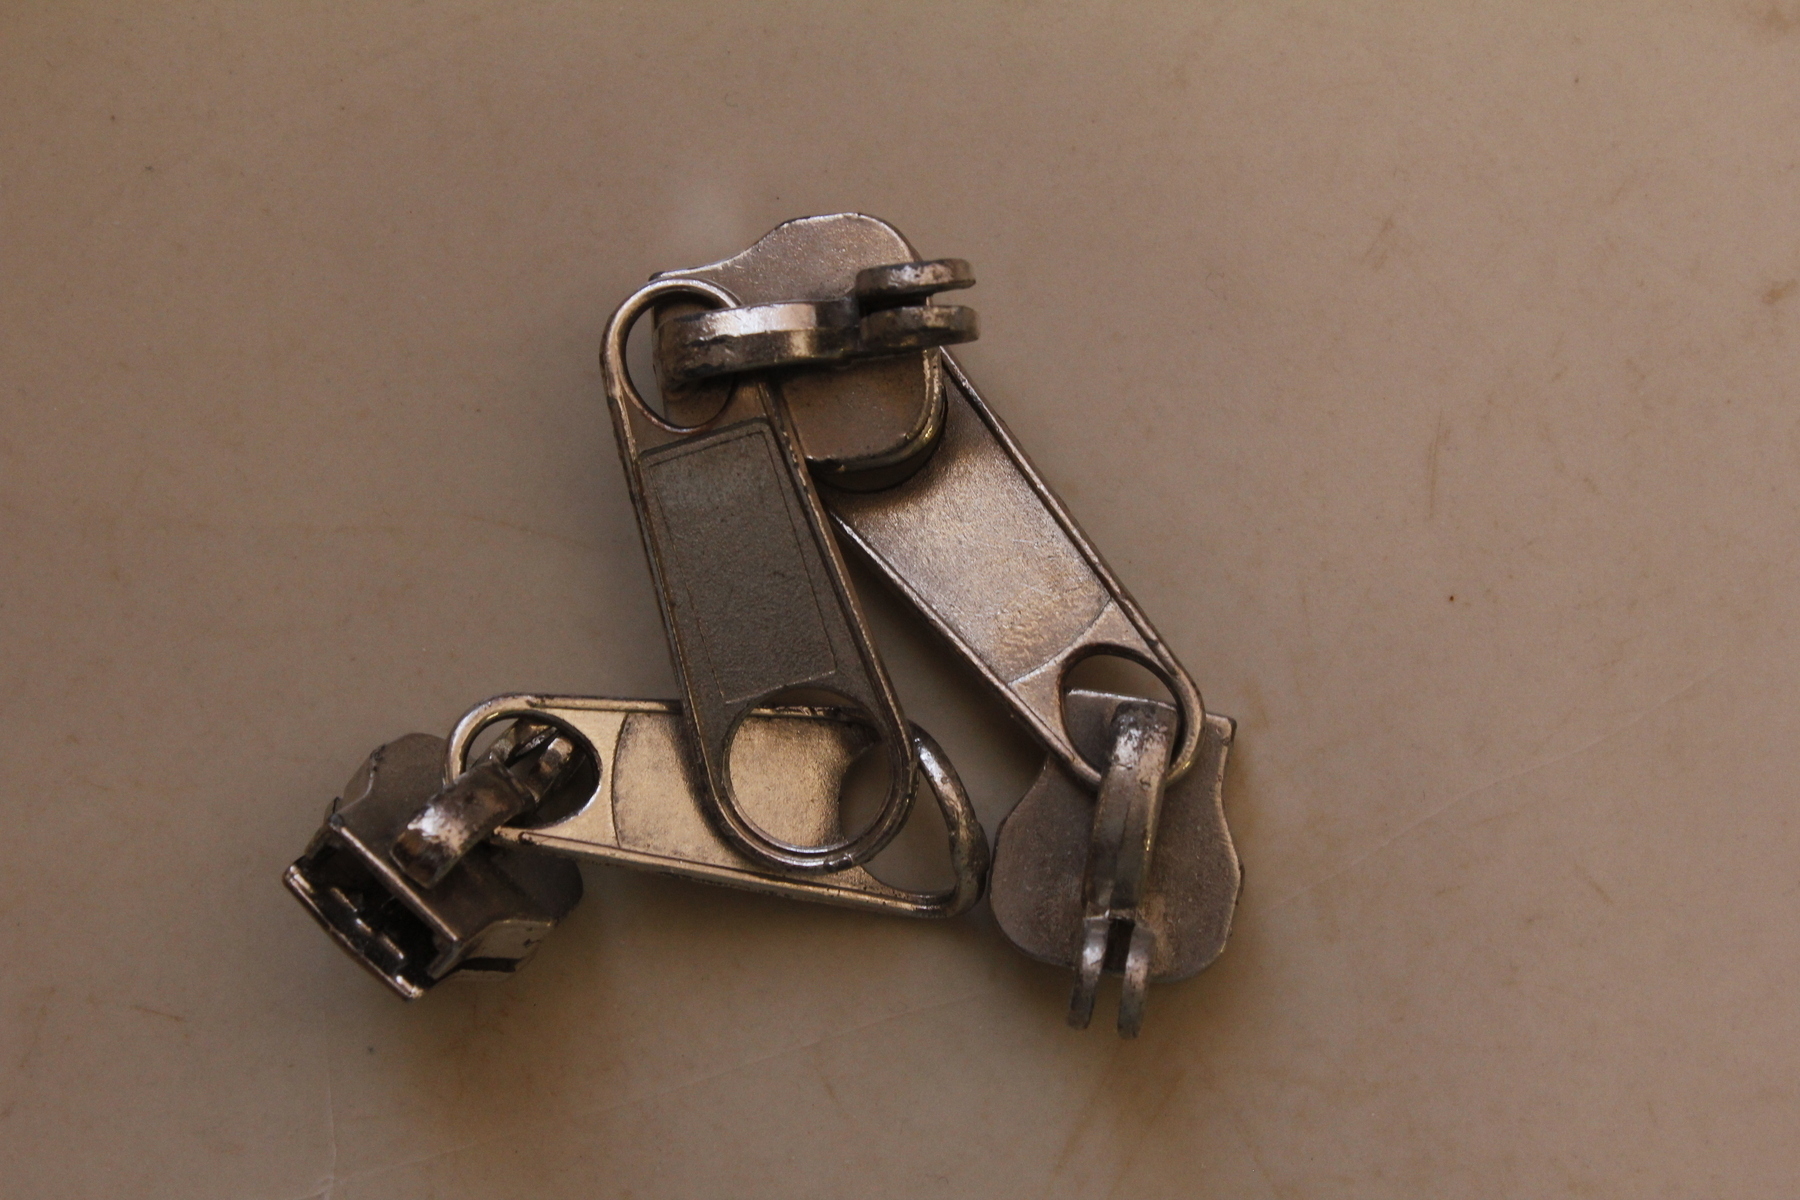 Three shiny zipper handles, no longer attached to zippers, lie jumbled together on a soft, mottled brown background. The camera has zoomed in so the zipper handles seem big, and detailed. Illumination is from the side, lighting some surfaces and throwing others into shadow.